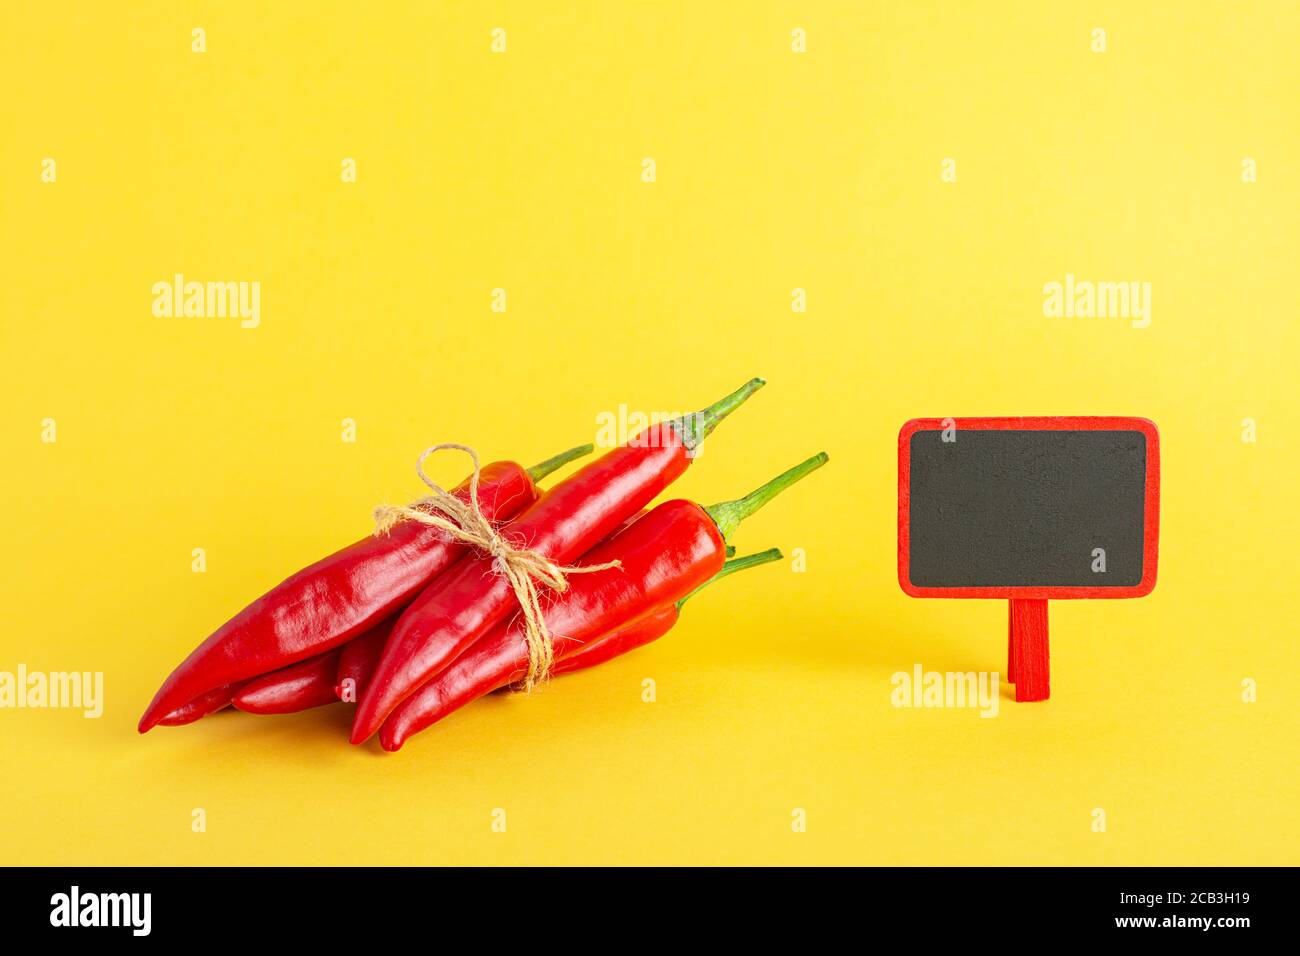 Red hot chili pepper and a small blackboard on a yellow background. Stock Photo